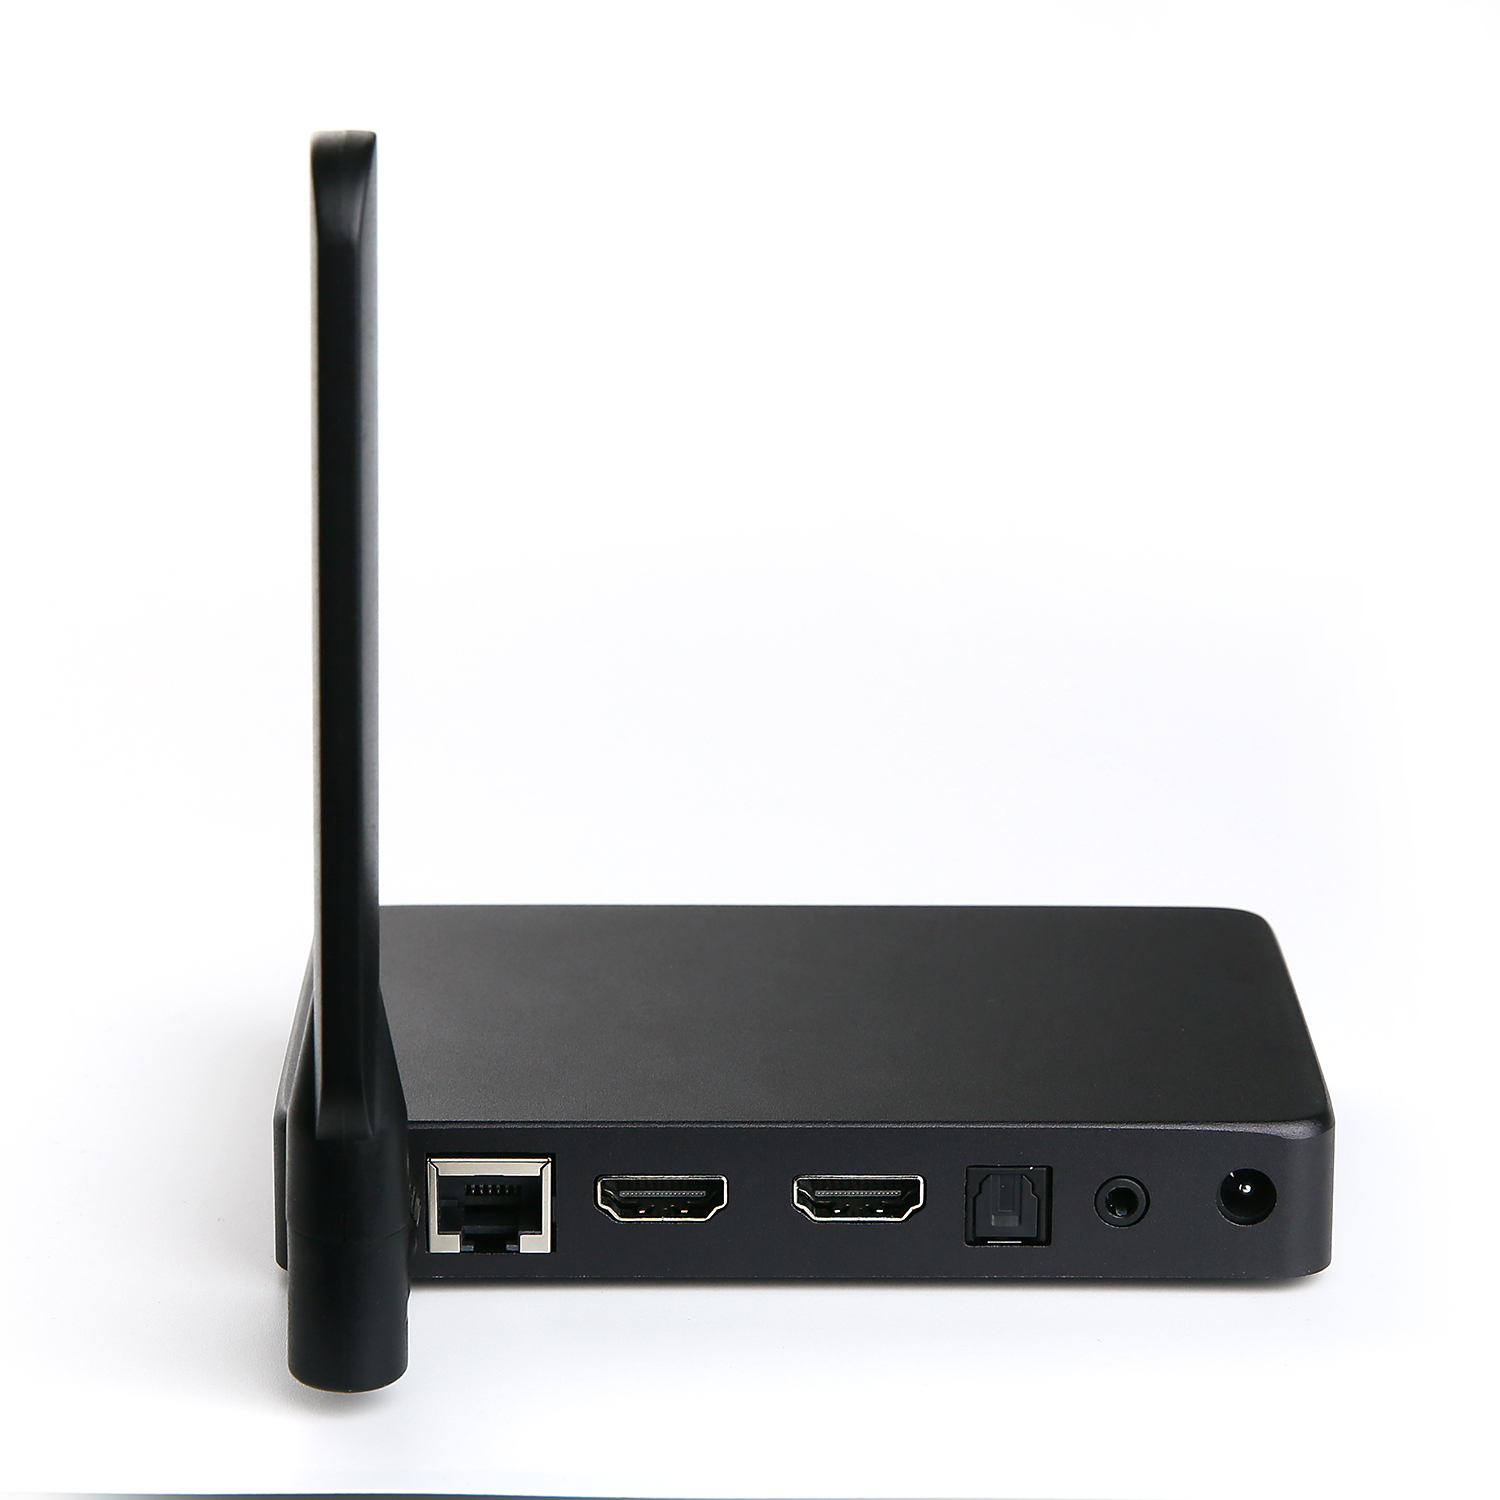 OEM Android TV box Suppliers OEM IPTV Box Manufacturer China